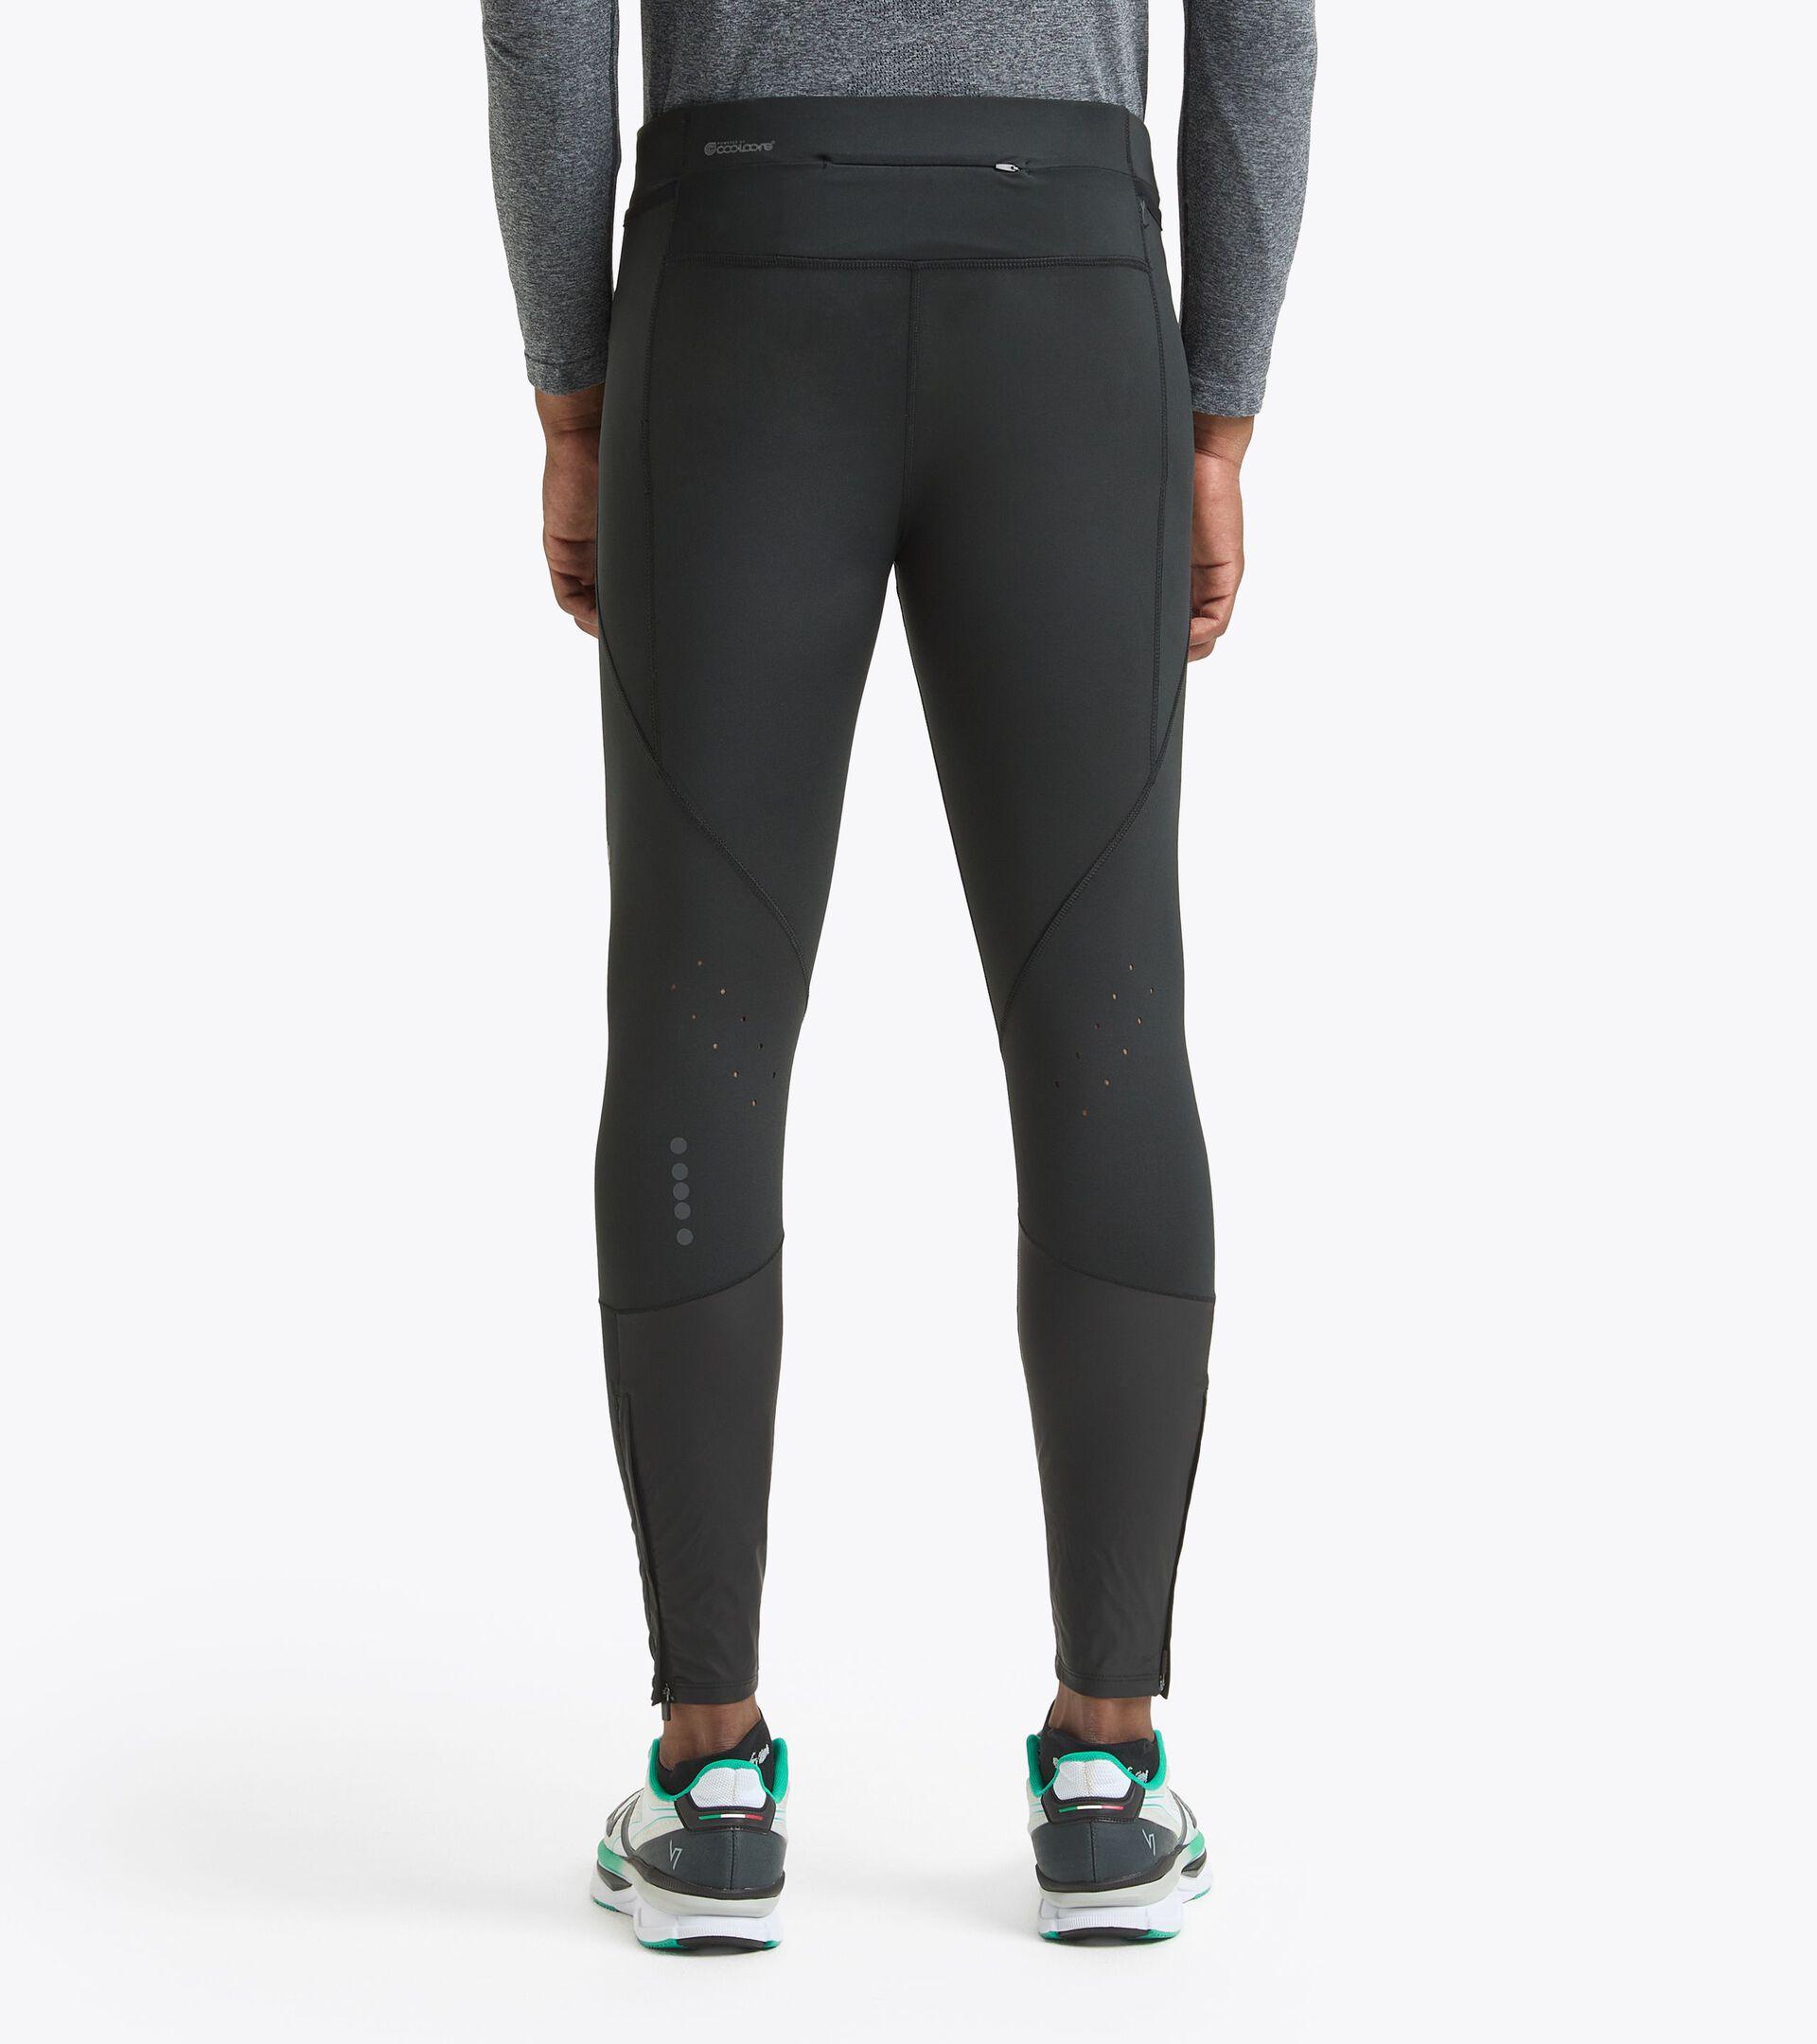 Adidas Cold.RDY Legging Women Compression Pants - Crew Navy Size: L